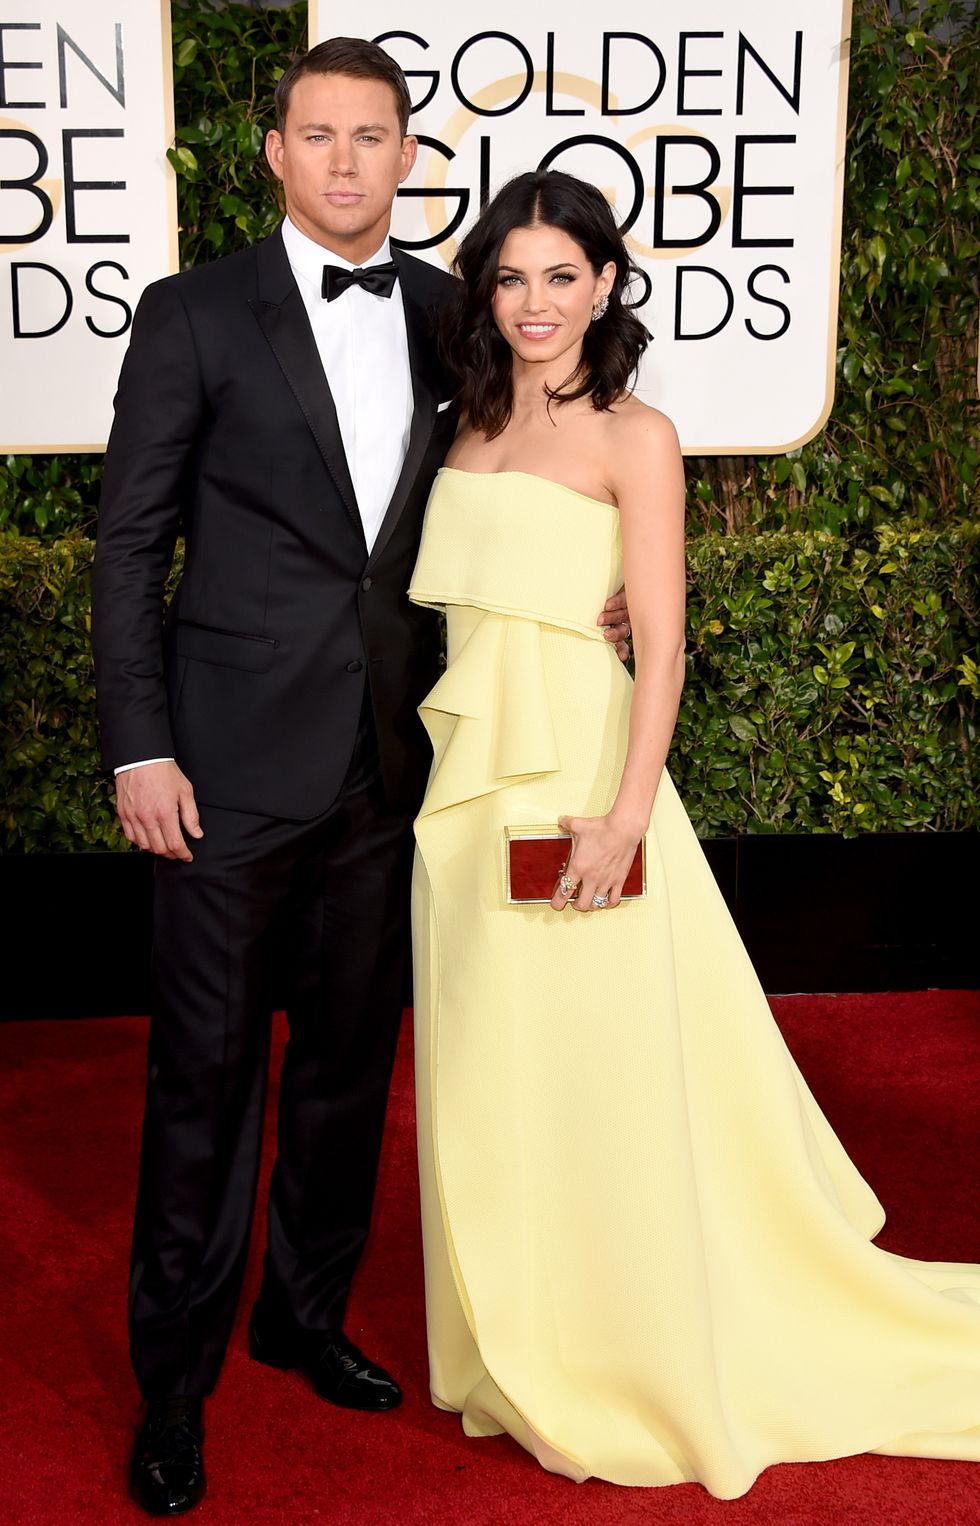 Channing Tatum at the Golden Globes 2015